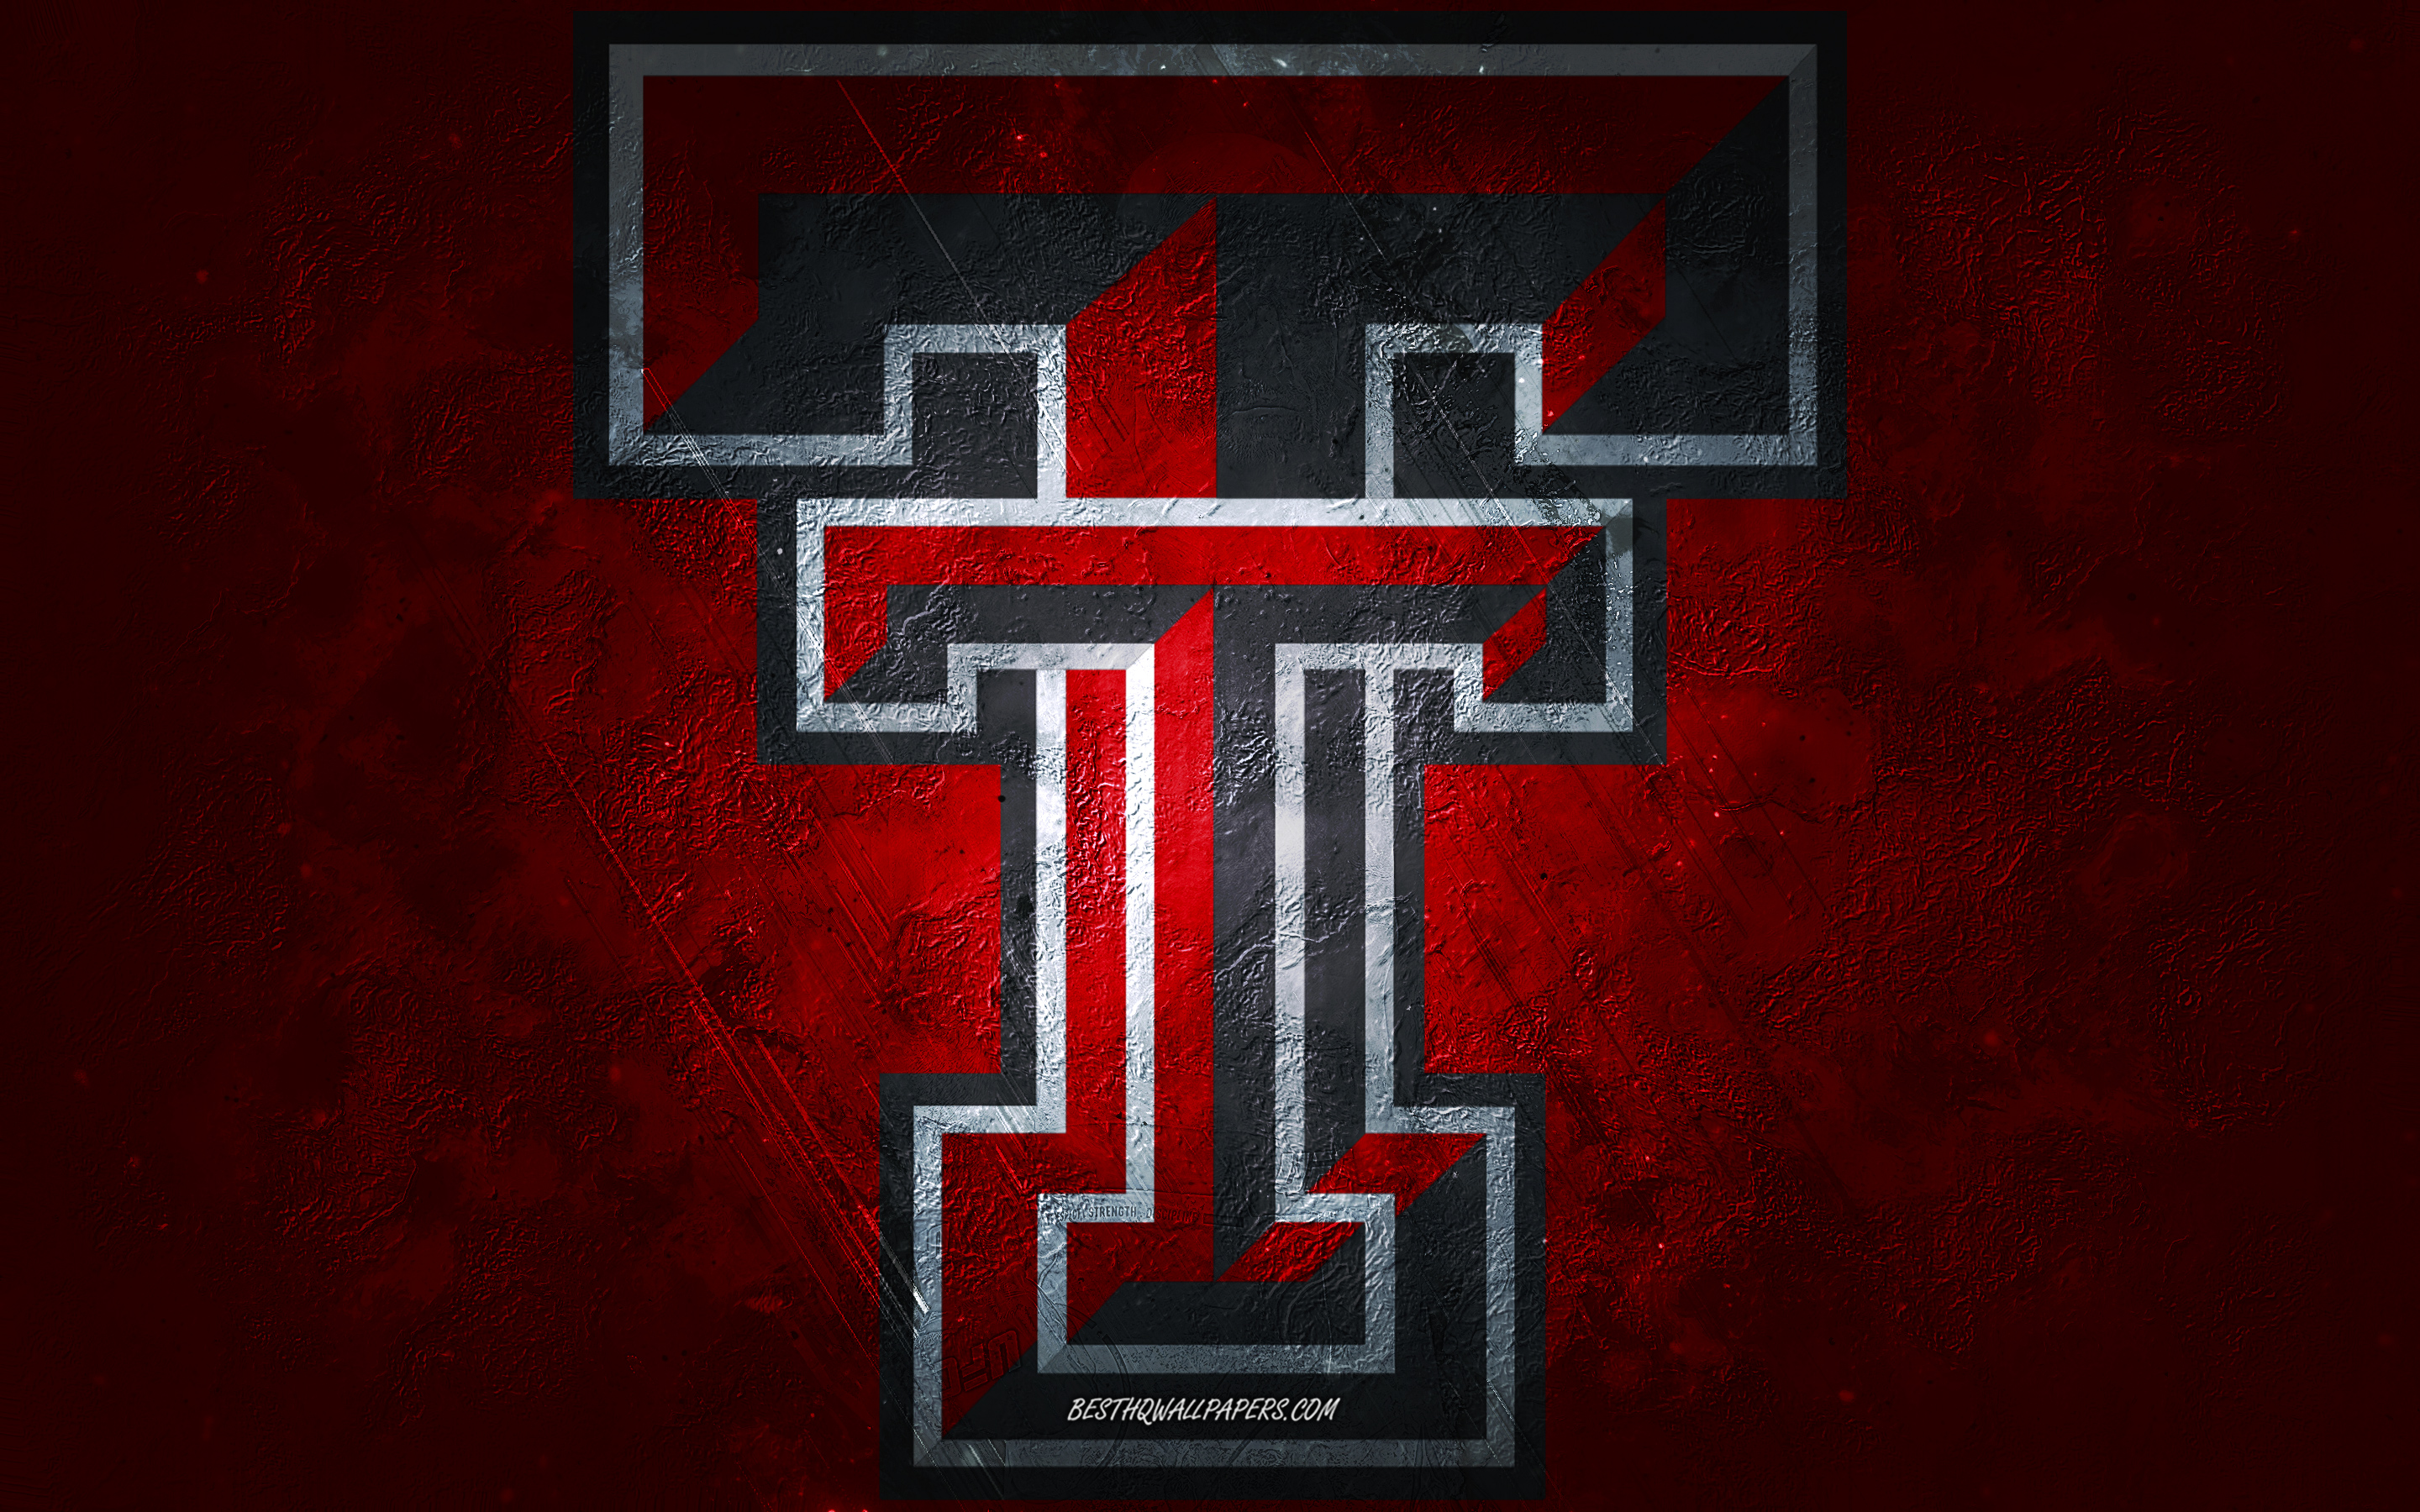 Download wallpaper Texas Tech Red Raiders, American football team, red background, Texas Tech Red Raiders logo, grunge art, NCAA, American football, Texas Tech Red Raiders emblem for desktop with resolution 2880x1800. High